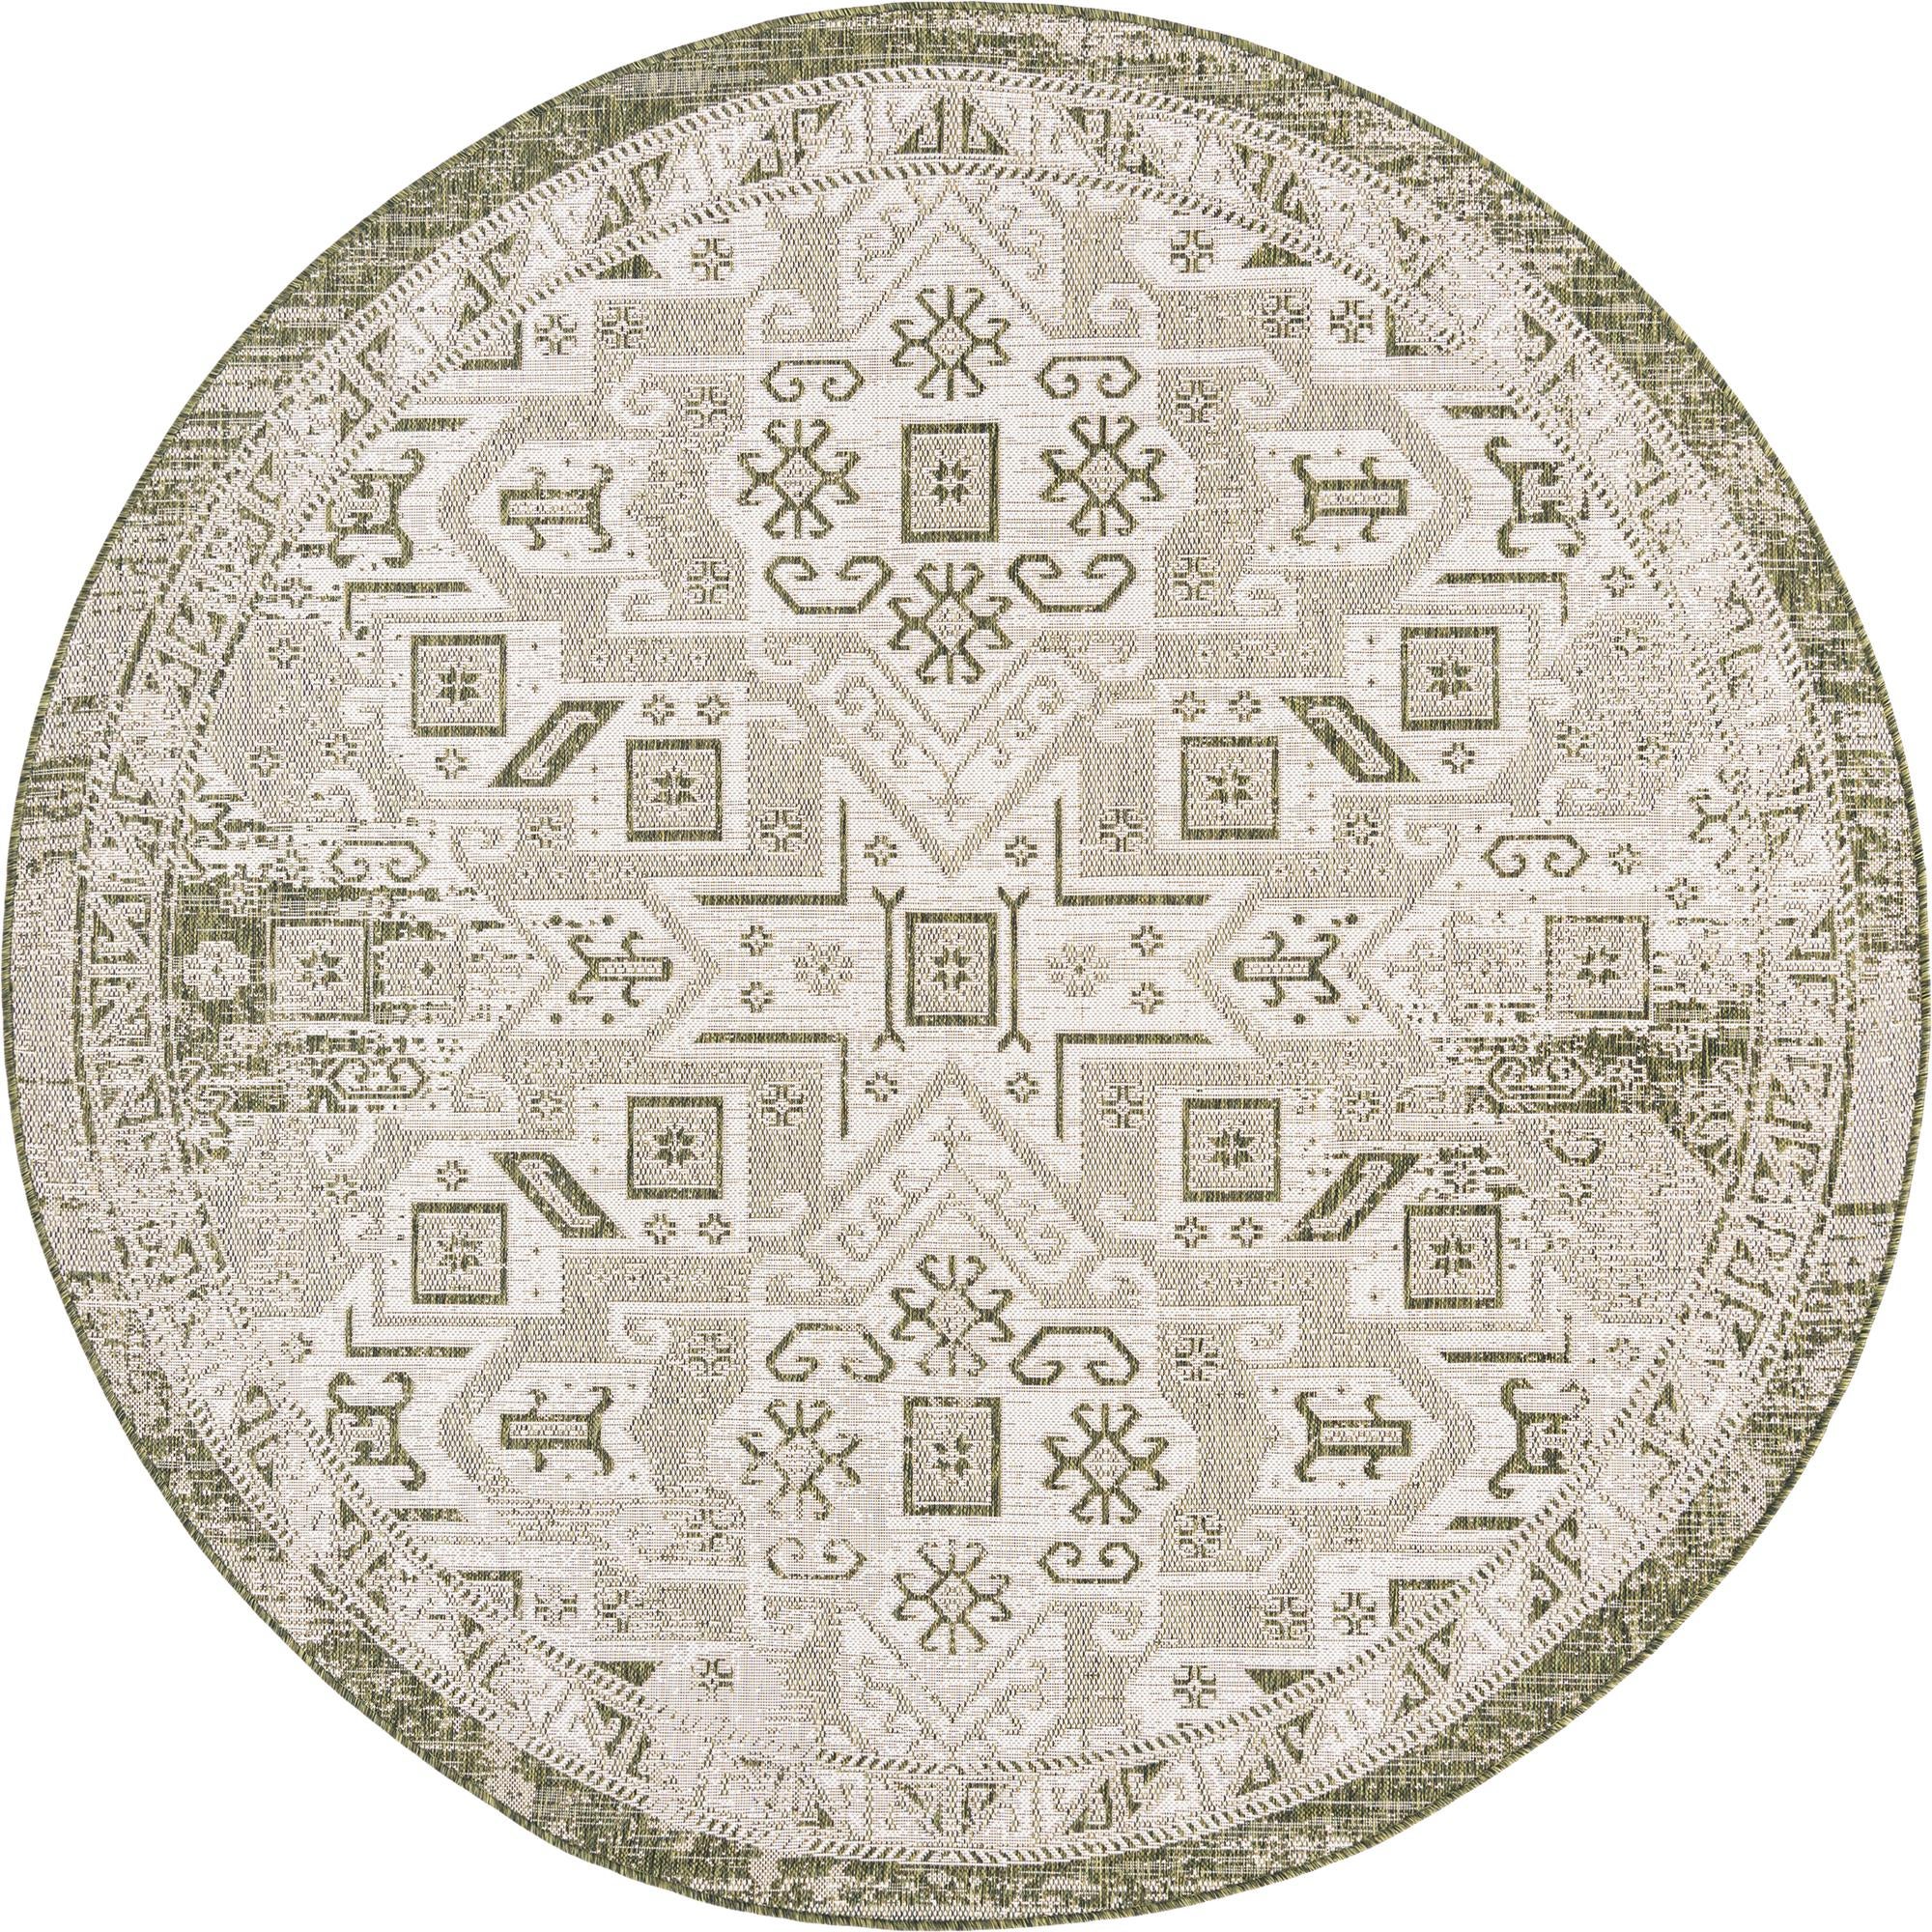 Rugs.com Outdoor Aztec Collection Rug – 8 Ft Round Green Flatweave Rug Perfect For Kitchens, Dining Rooms - image 2 of 6